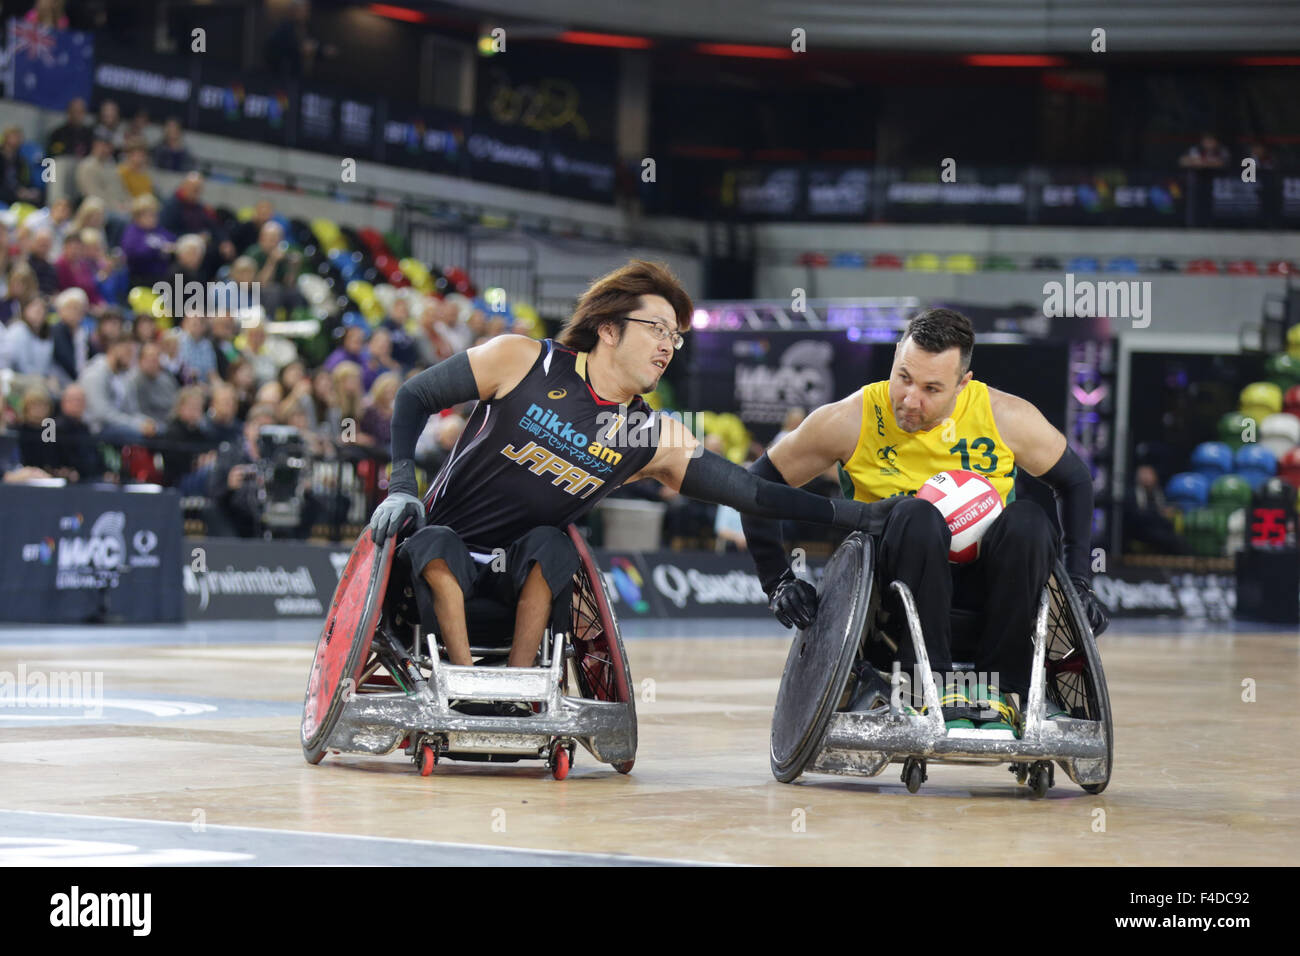 London, UK. 16th October, 2015. World Wheelchair Rugby Challenge Team Aus beat Japan 60-55 to win Bronze medal. Copperbox, Olympic Park, London, Wakayama of Japan tackles Carr of Aus. UK. 16th October, 2015. copyright carol moir/Alamy Live News Stock Photo